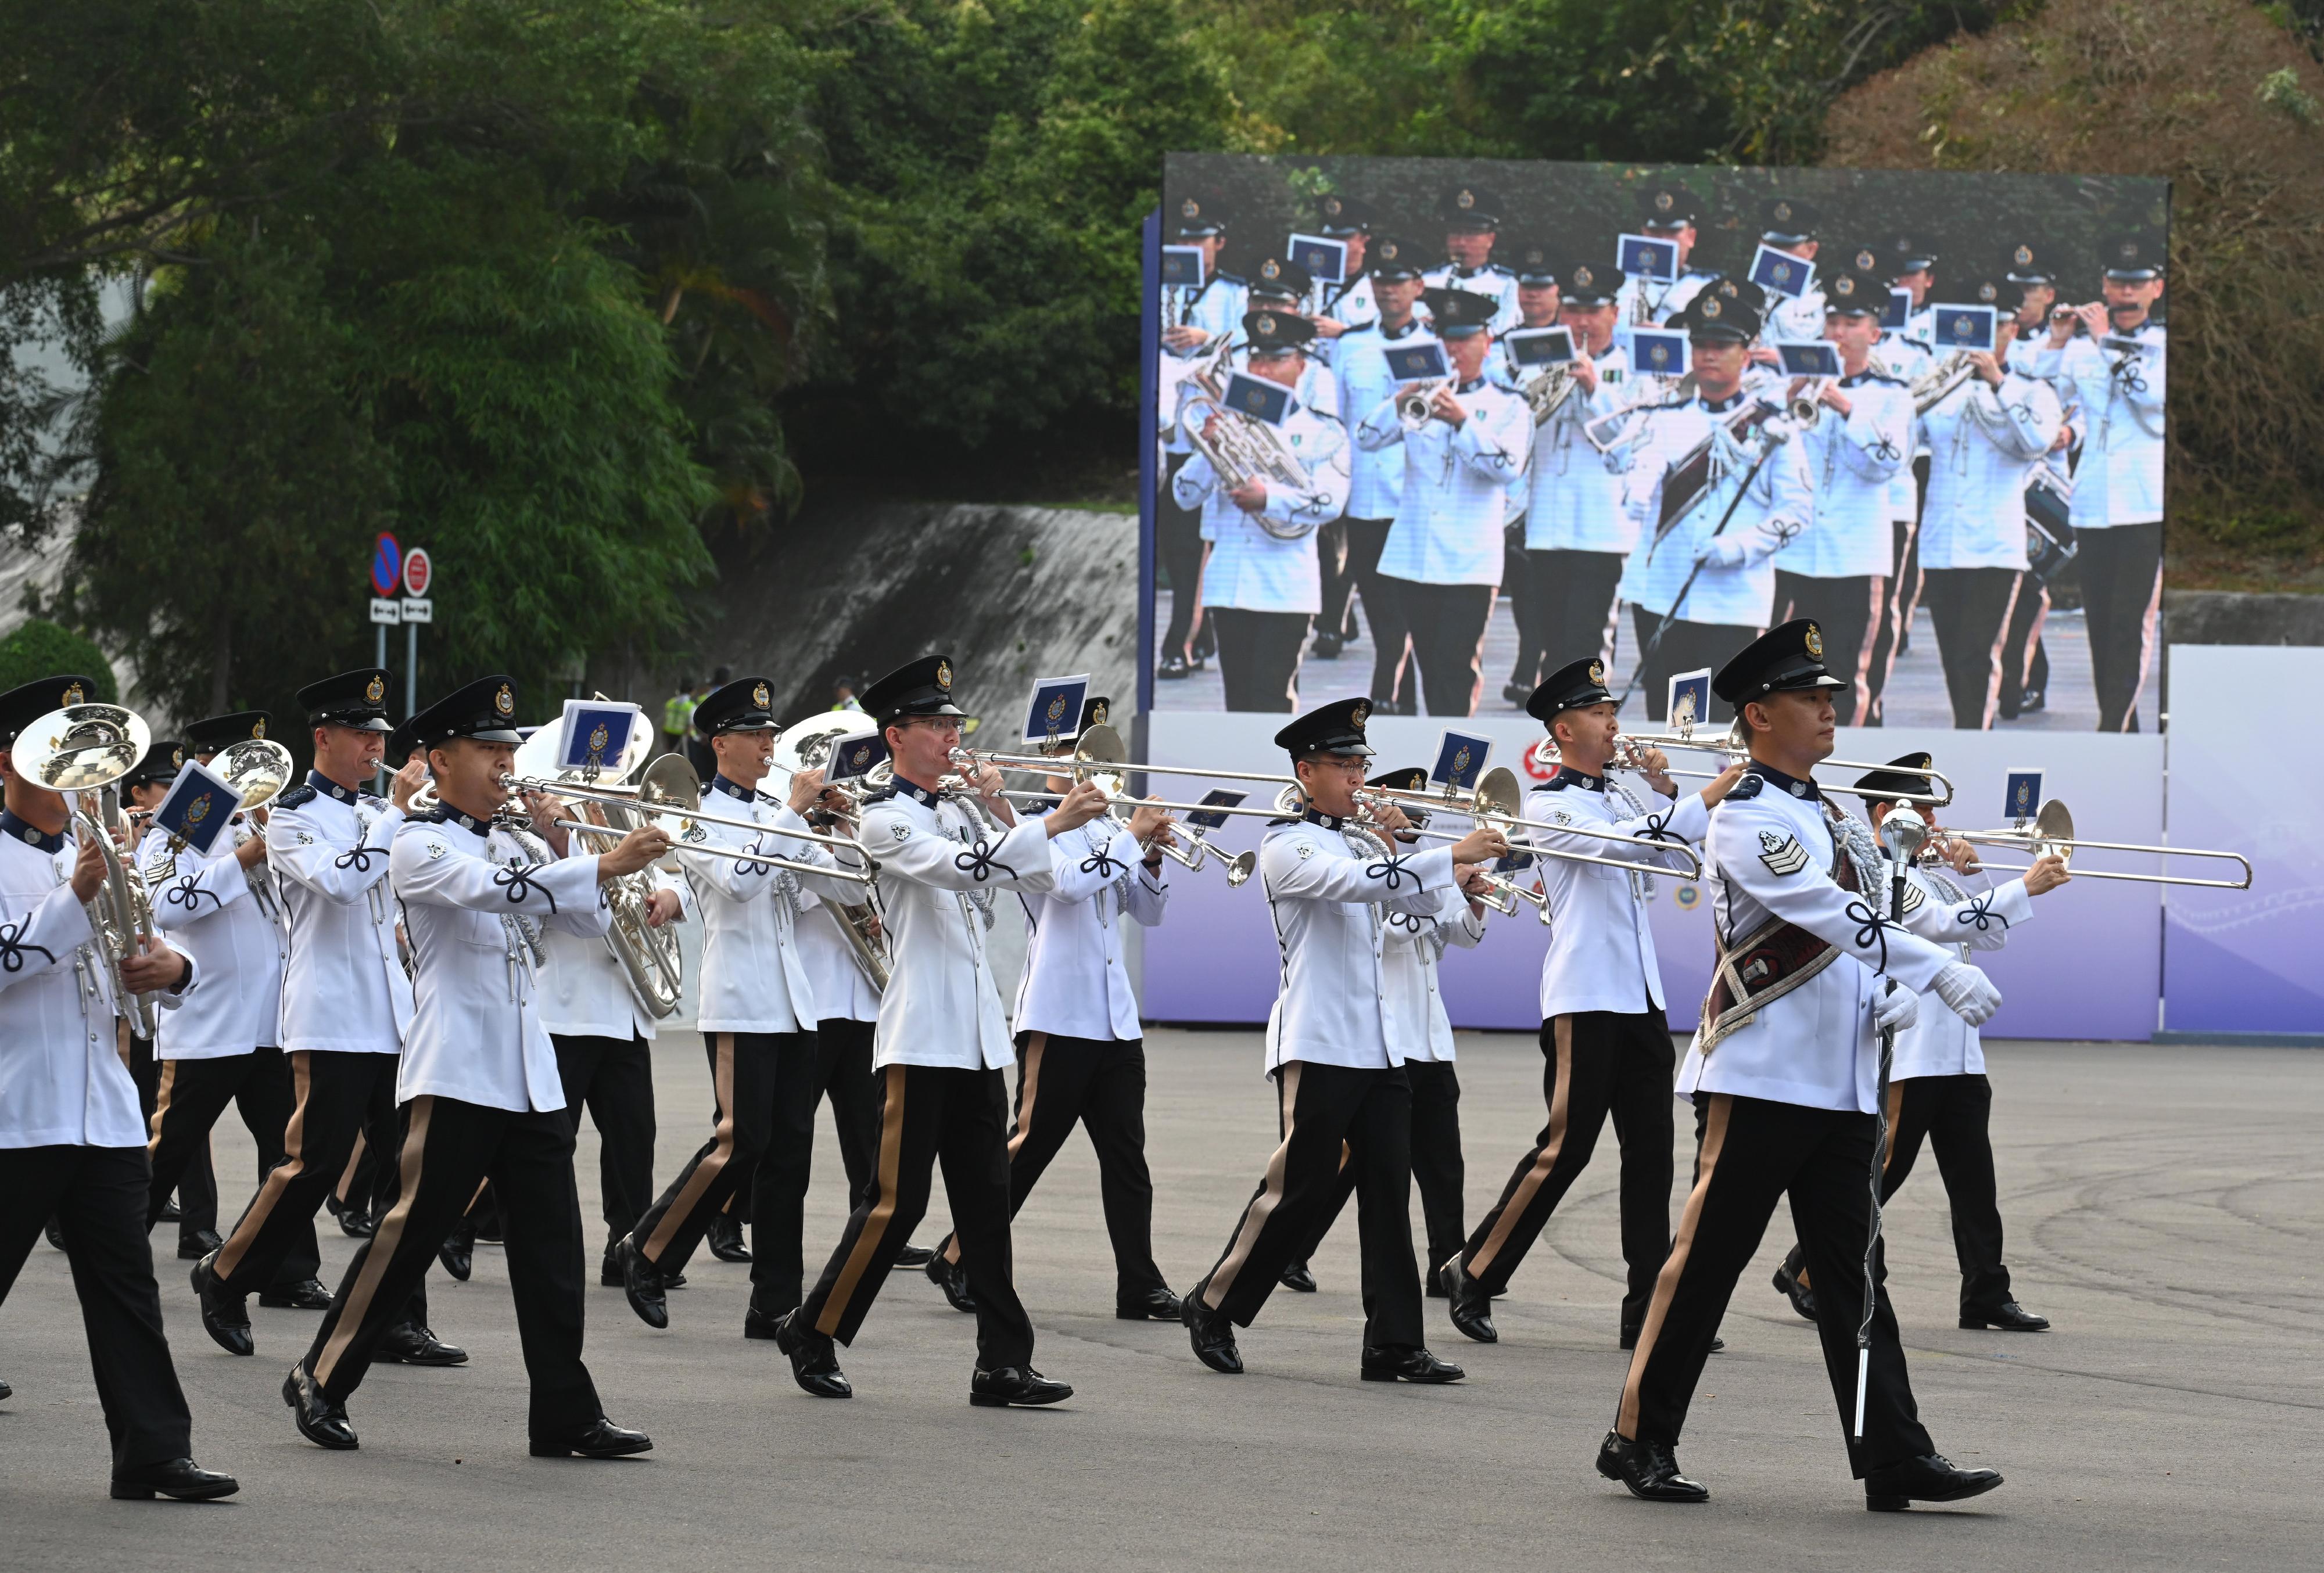 The Security Bureau and its disciplined services jointly held a National Security Education Day flag raising ceremony at the Hong Kong Police College today (April 15). Photo shows the Hong Kong Police Band conducting a performance to open the ceremony.